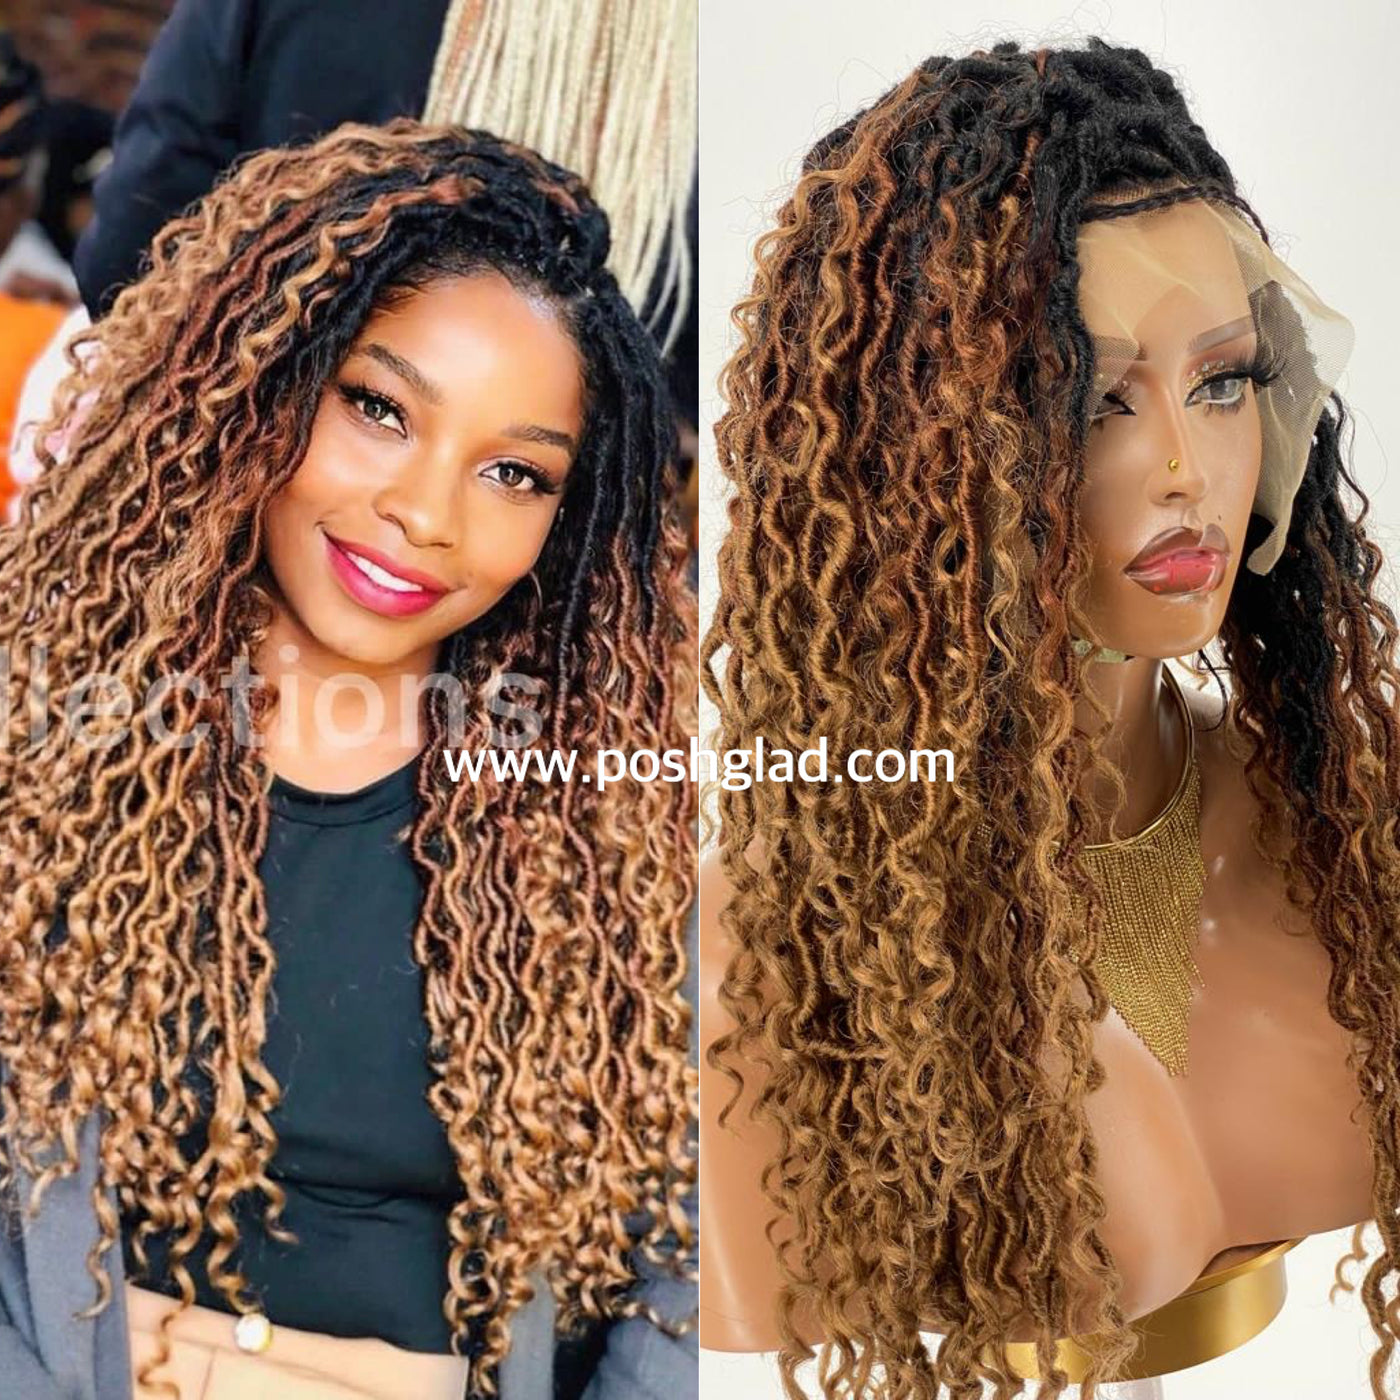 Faux locs -Africa Queen -Ready to ship